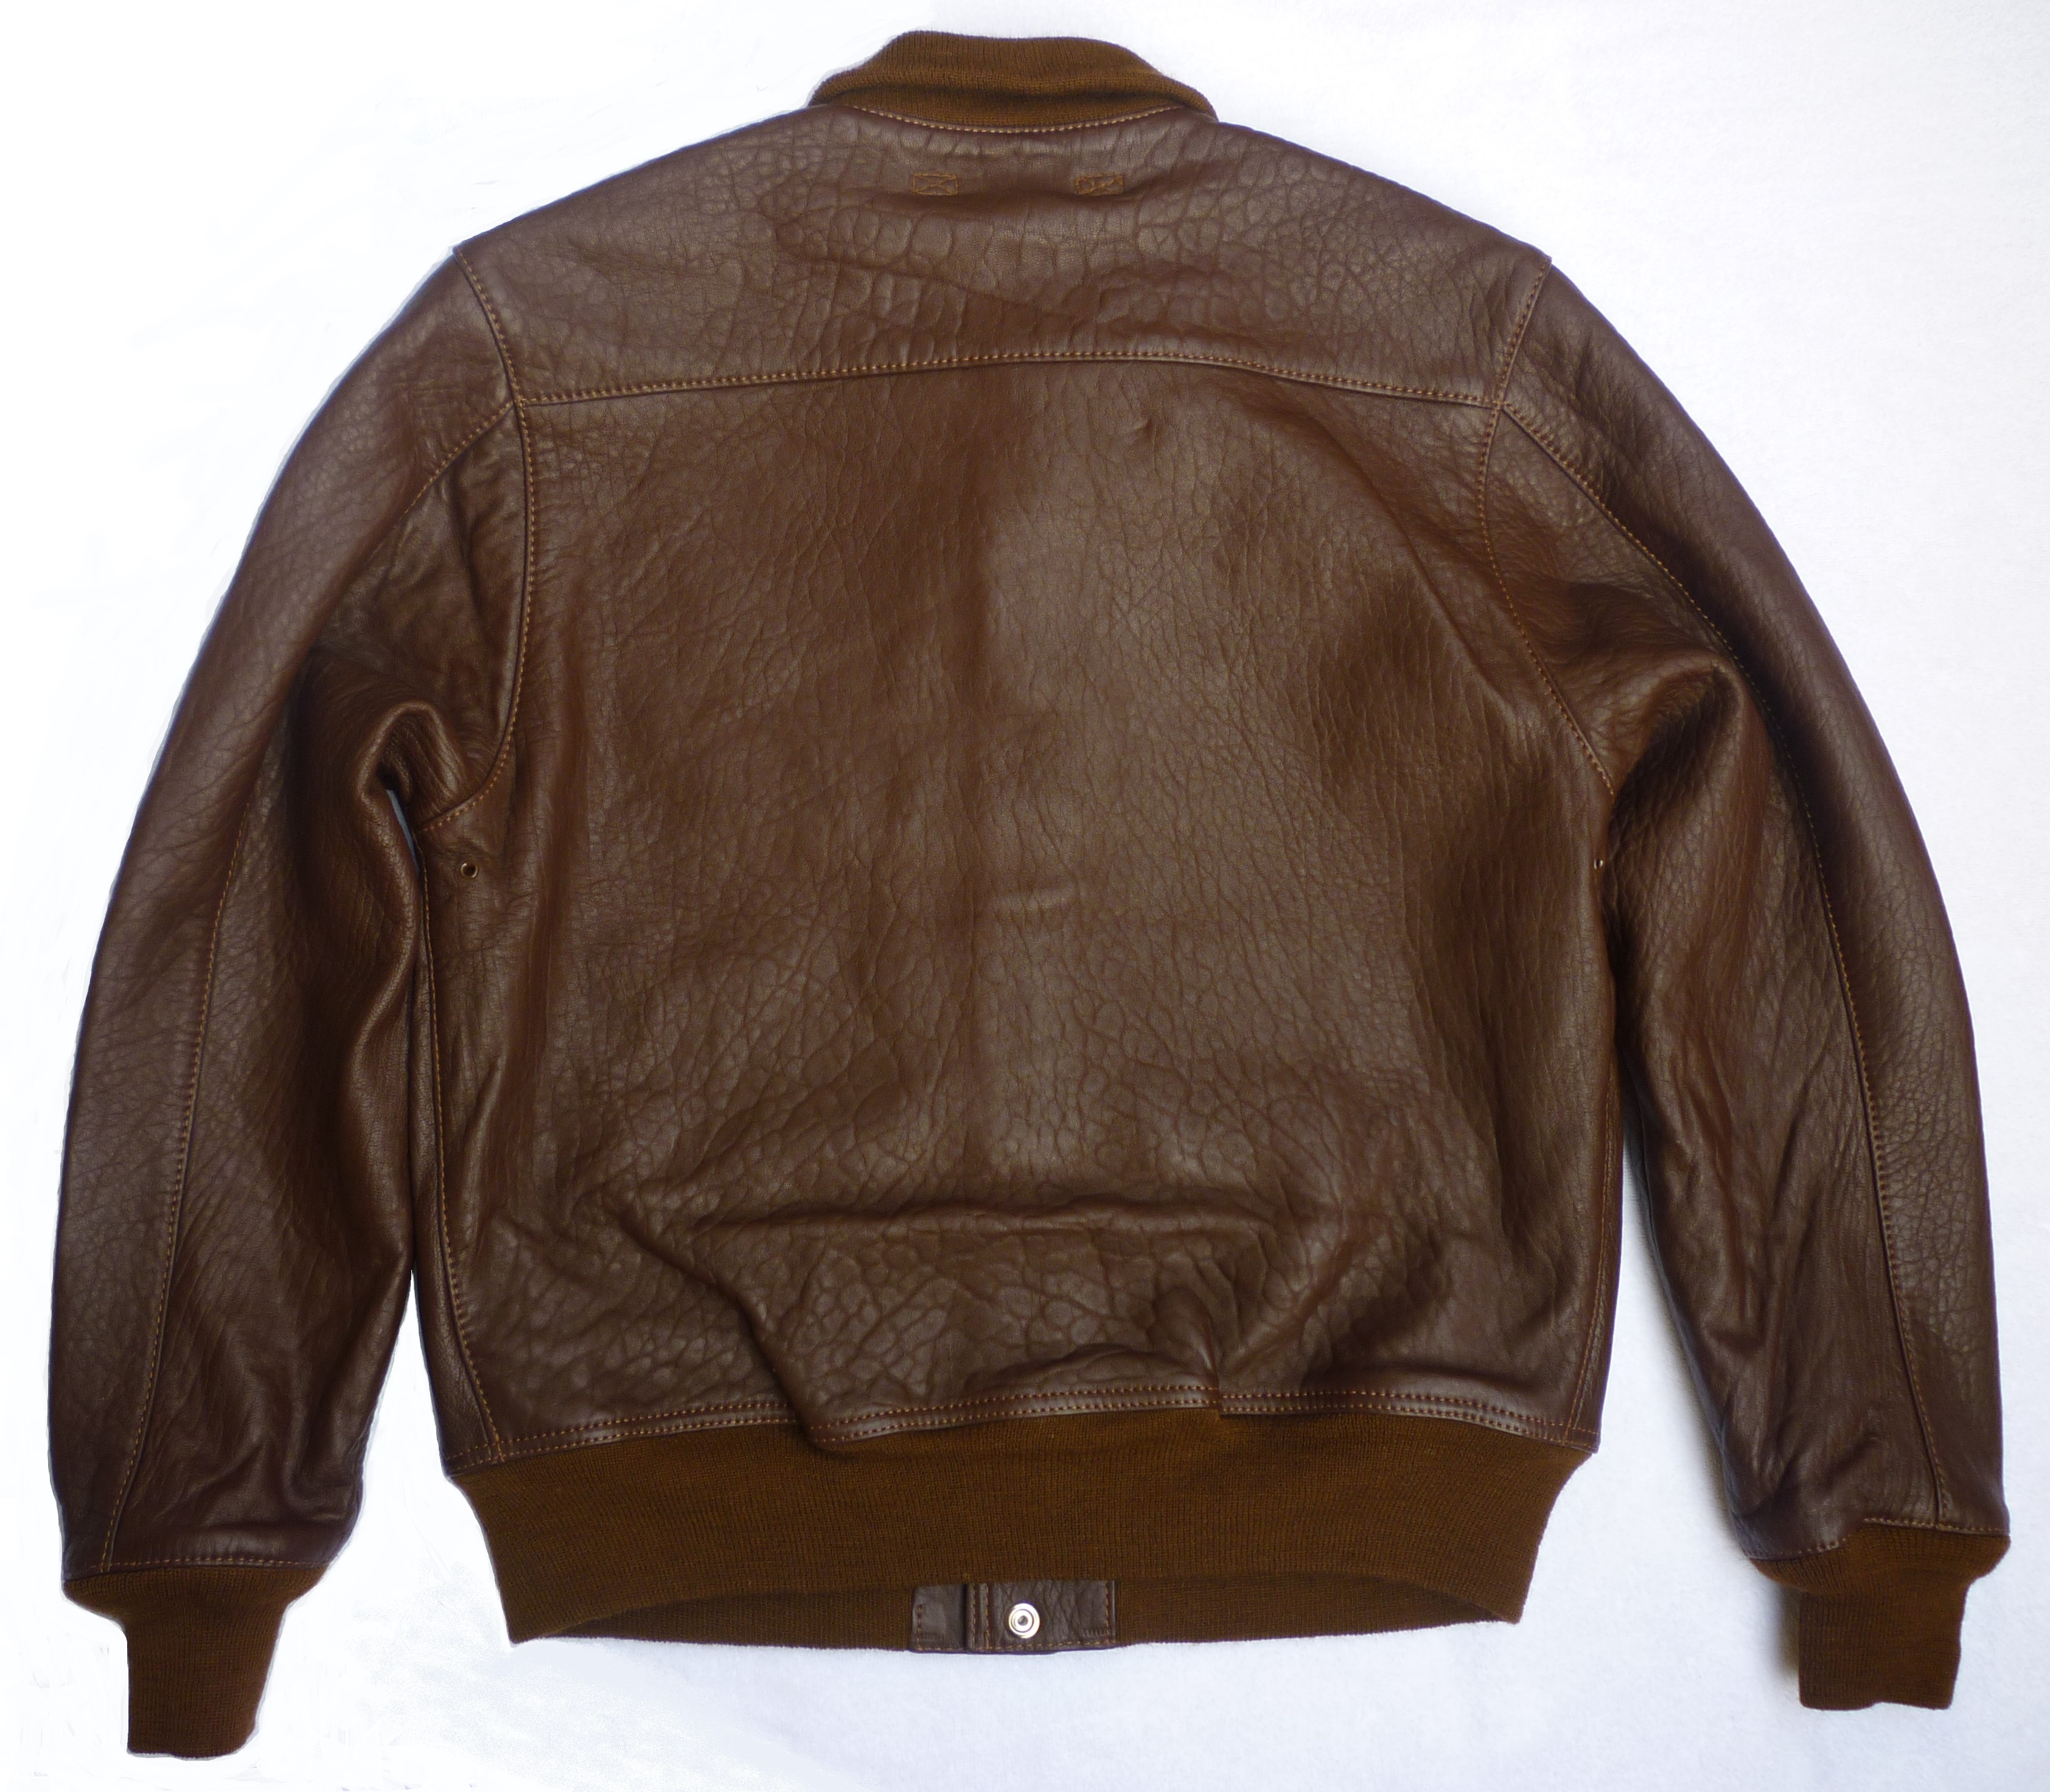 Headwind Mfg Co - The New A-1 | Vintage Leather Jackets Forum